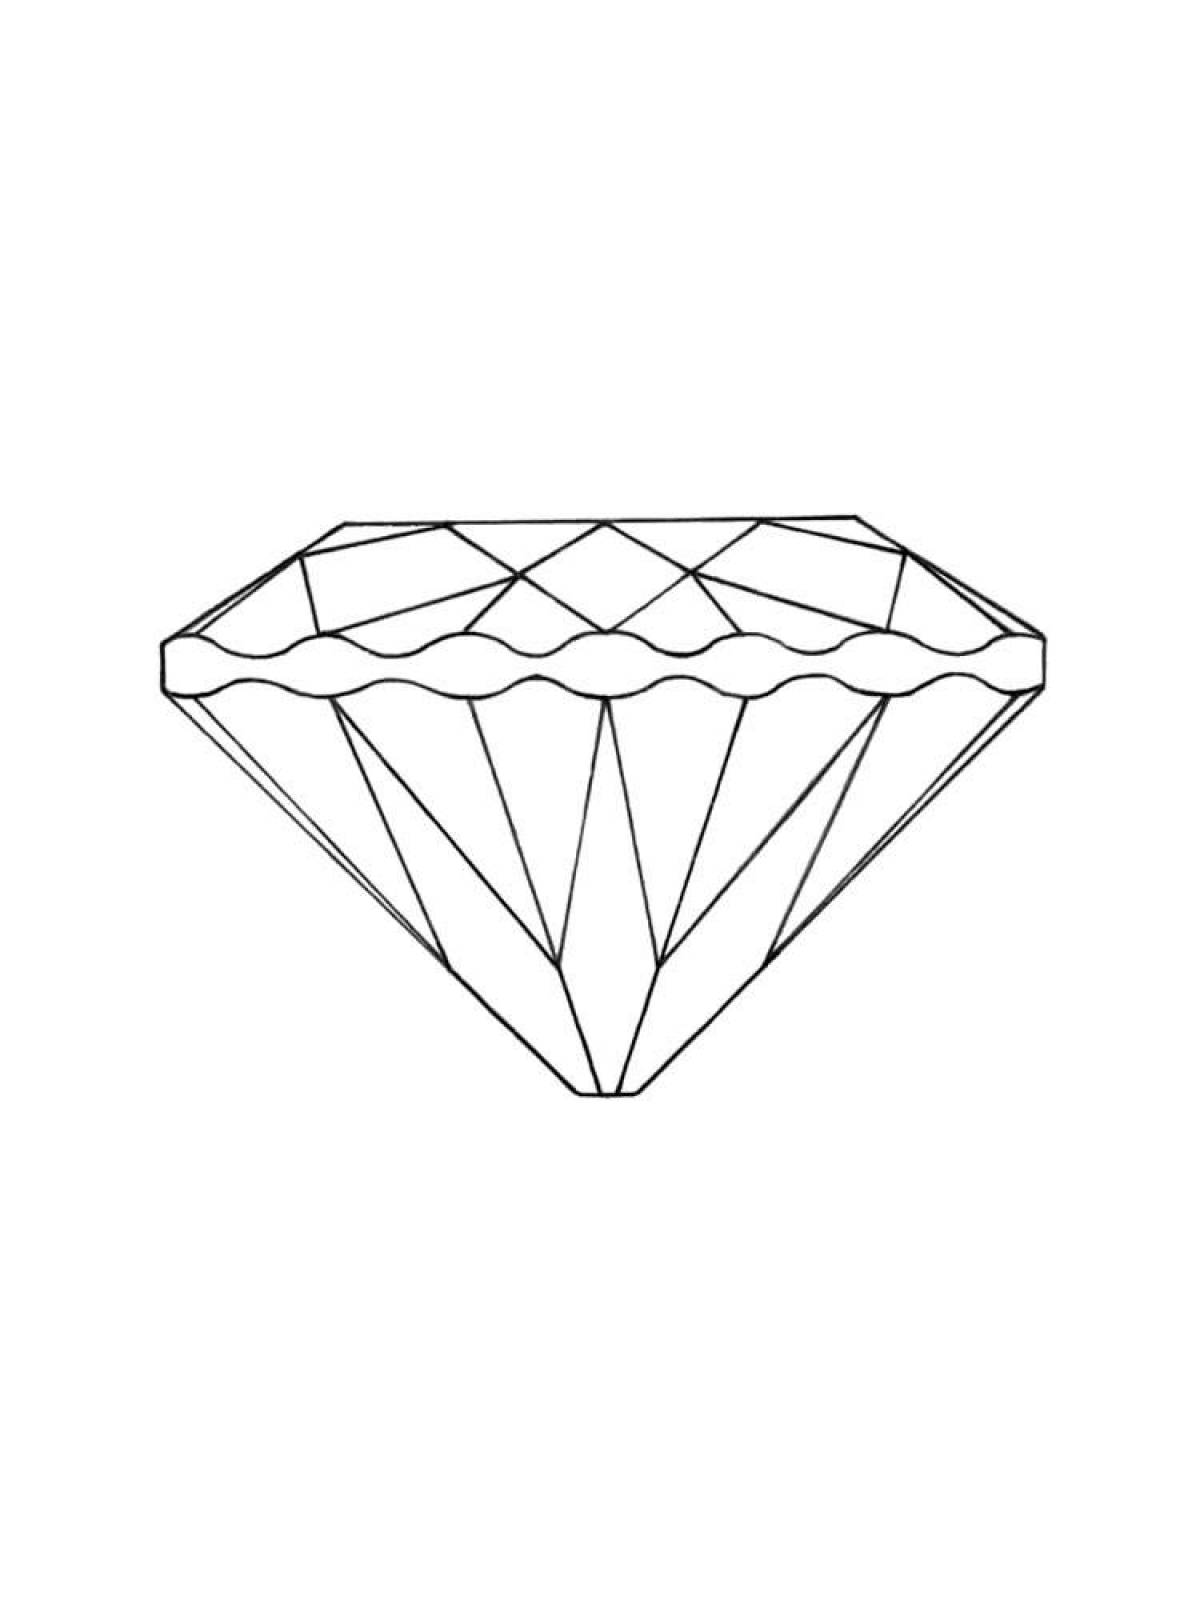 Coloring page of shiny crystals